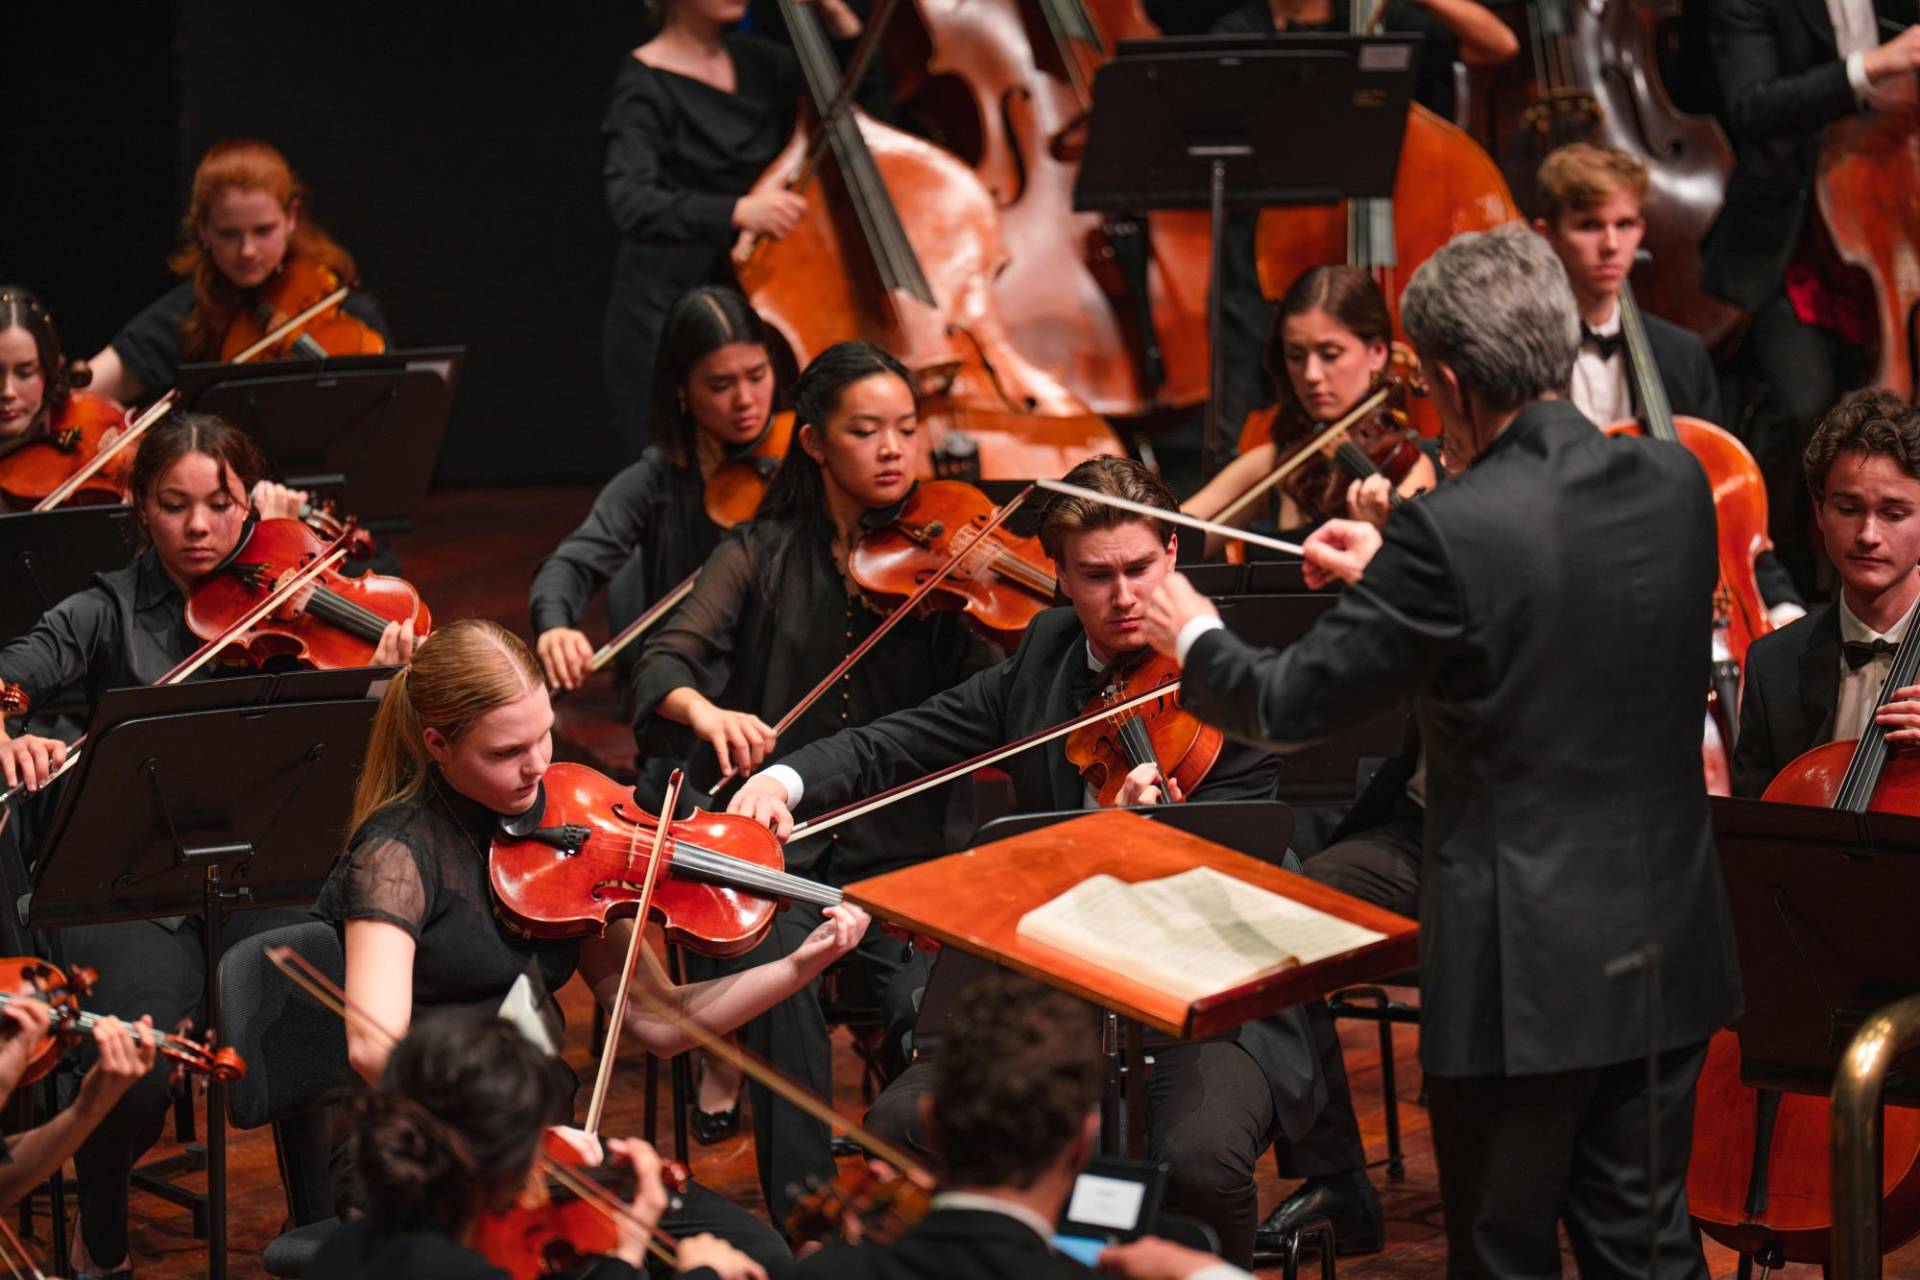 String musicians of the Australian Youth Orchestra conducted by Eivind Aadland at the Perth Concert Hall. They are wearing concert blacks. Edify Media 2023